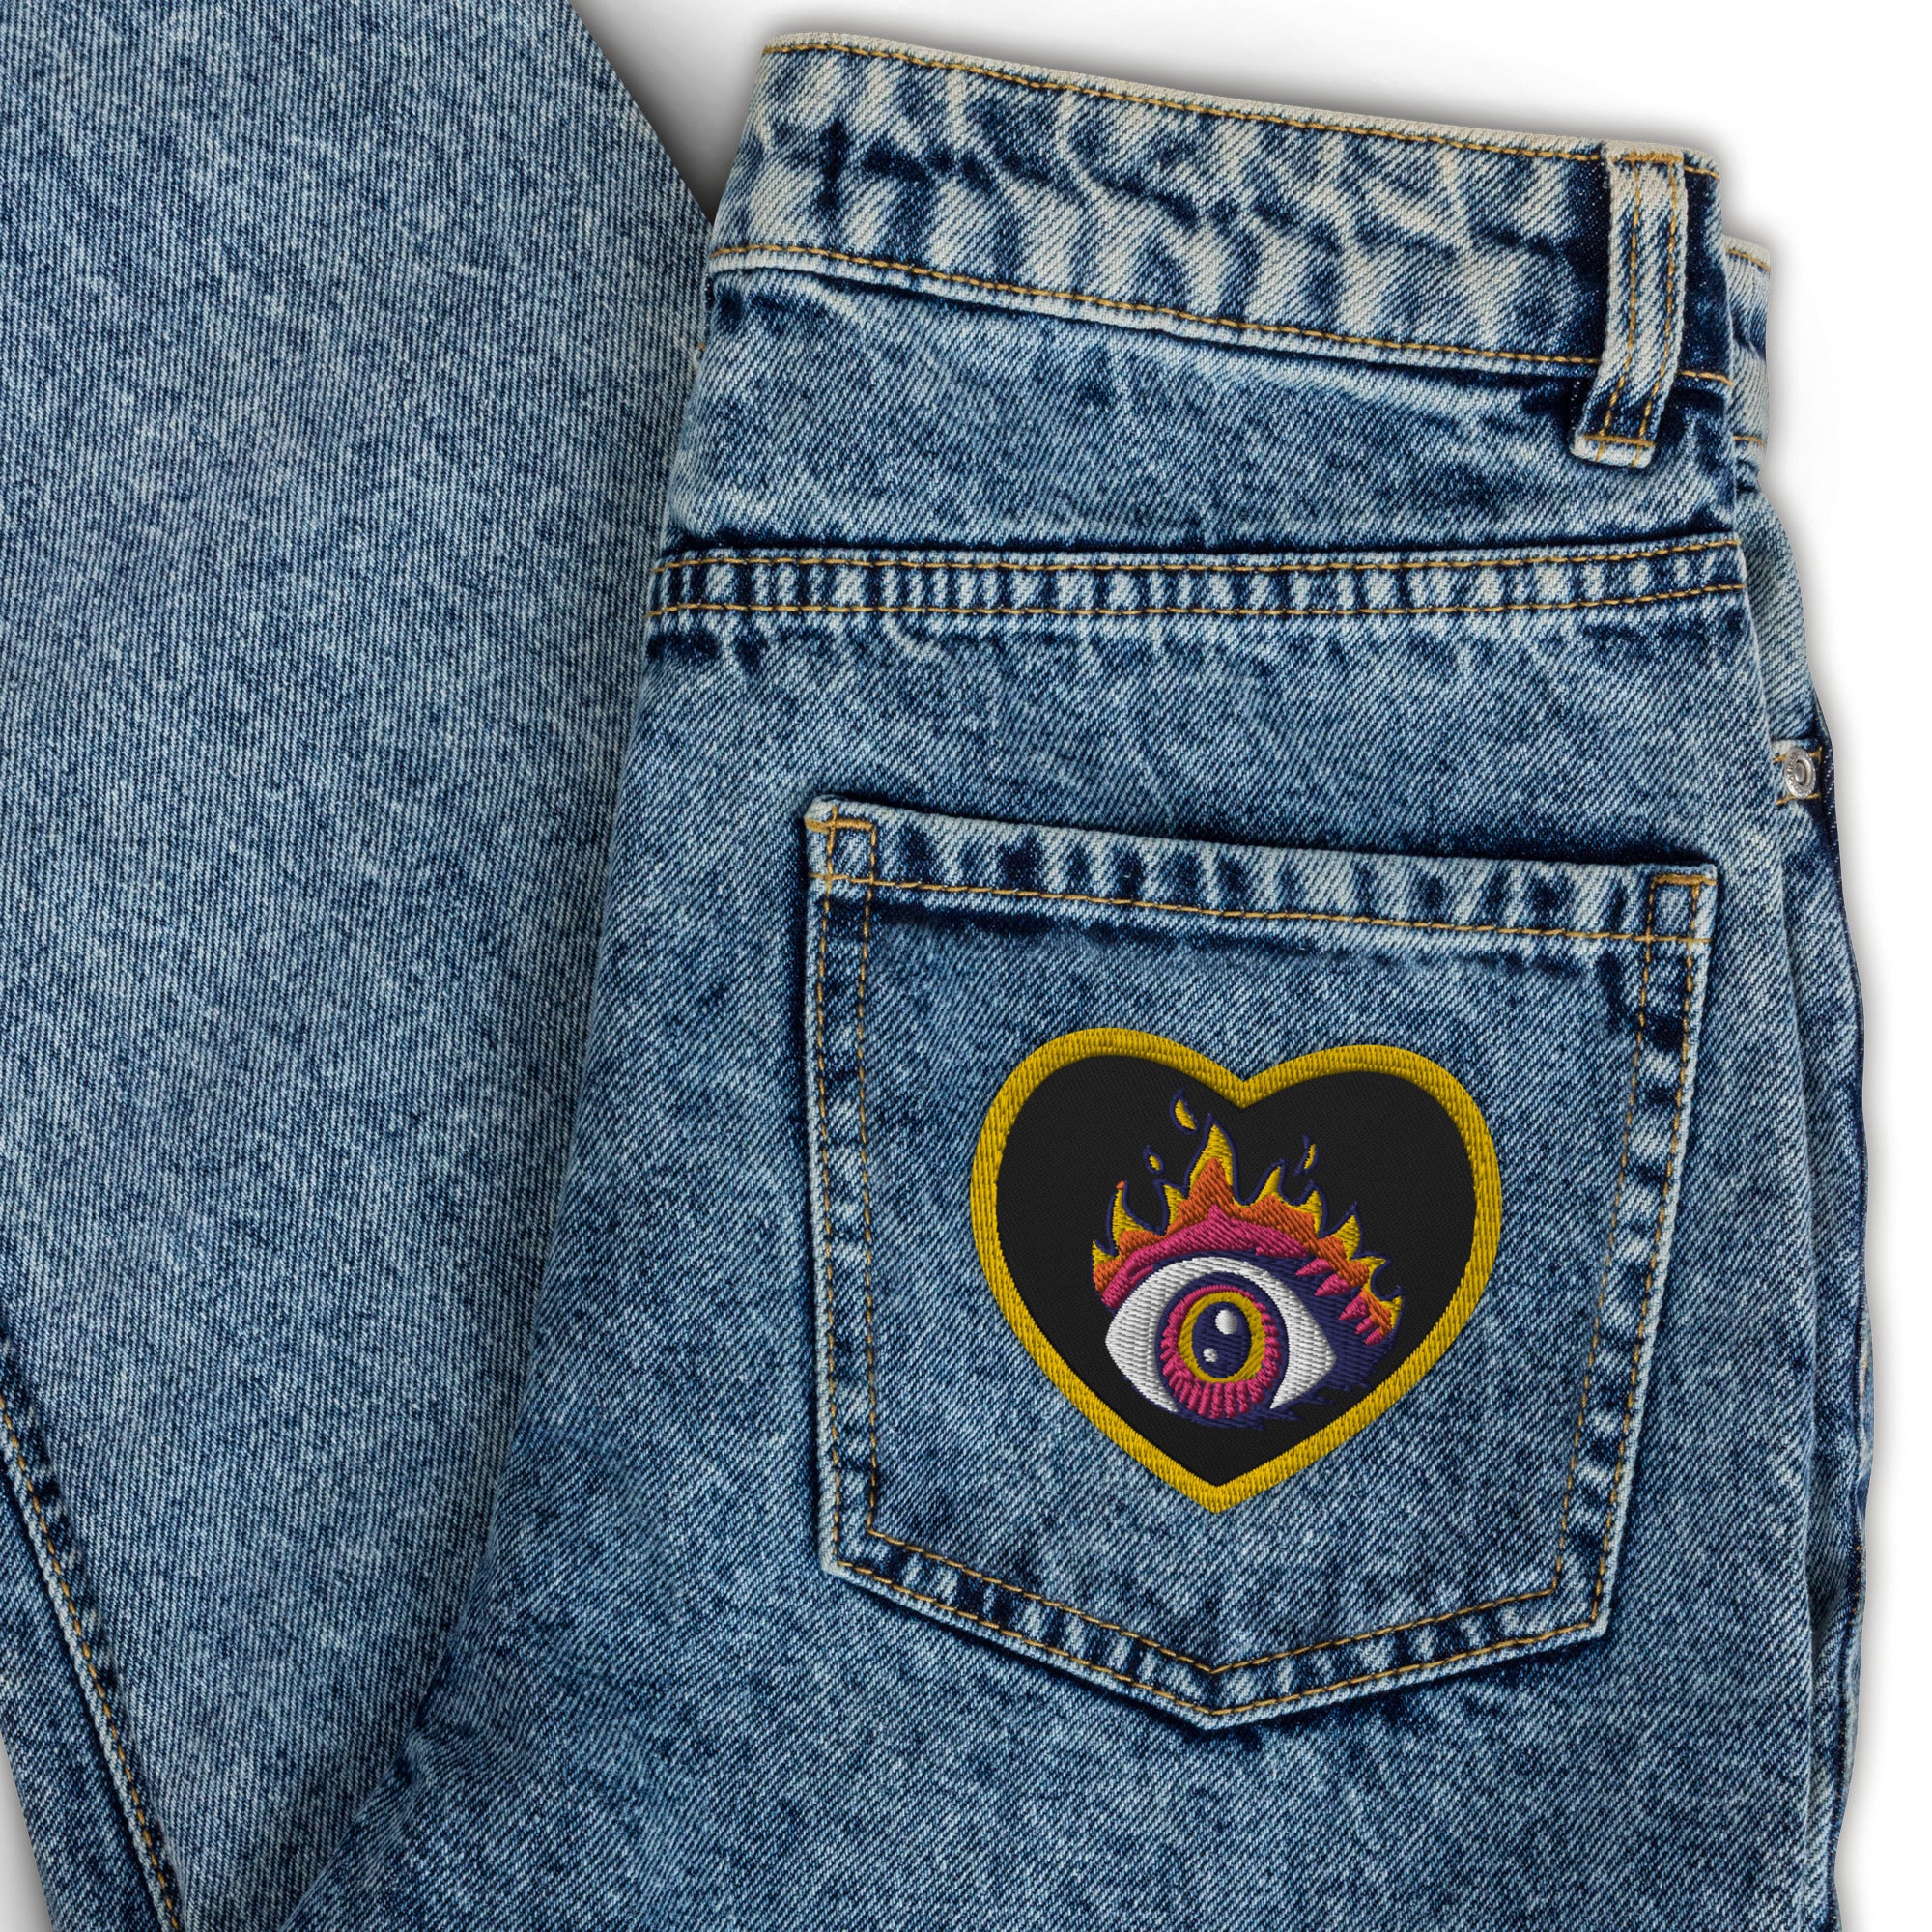 Burning Eye Embroidered patches